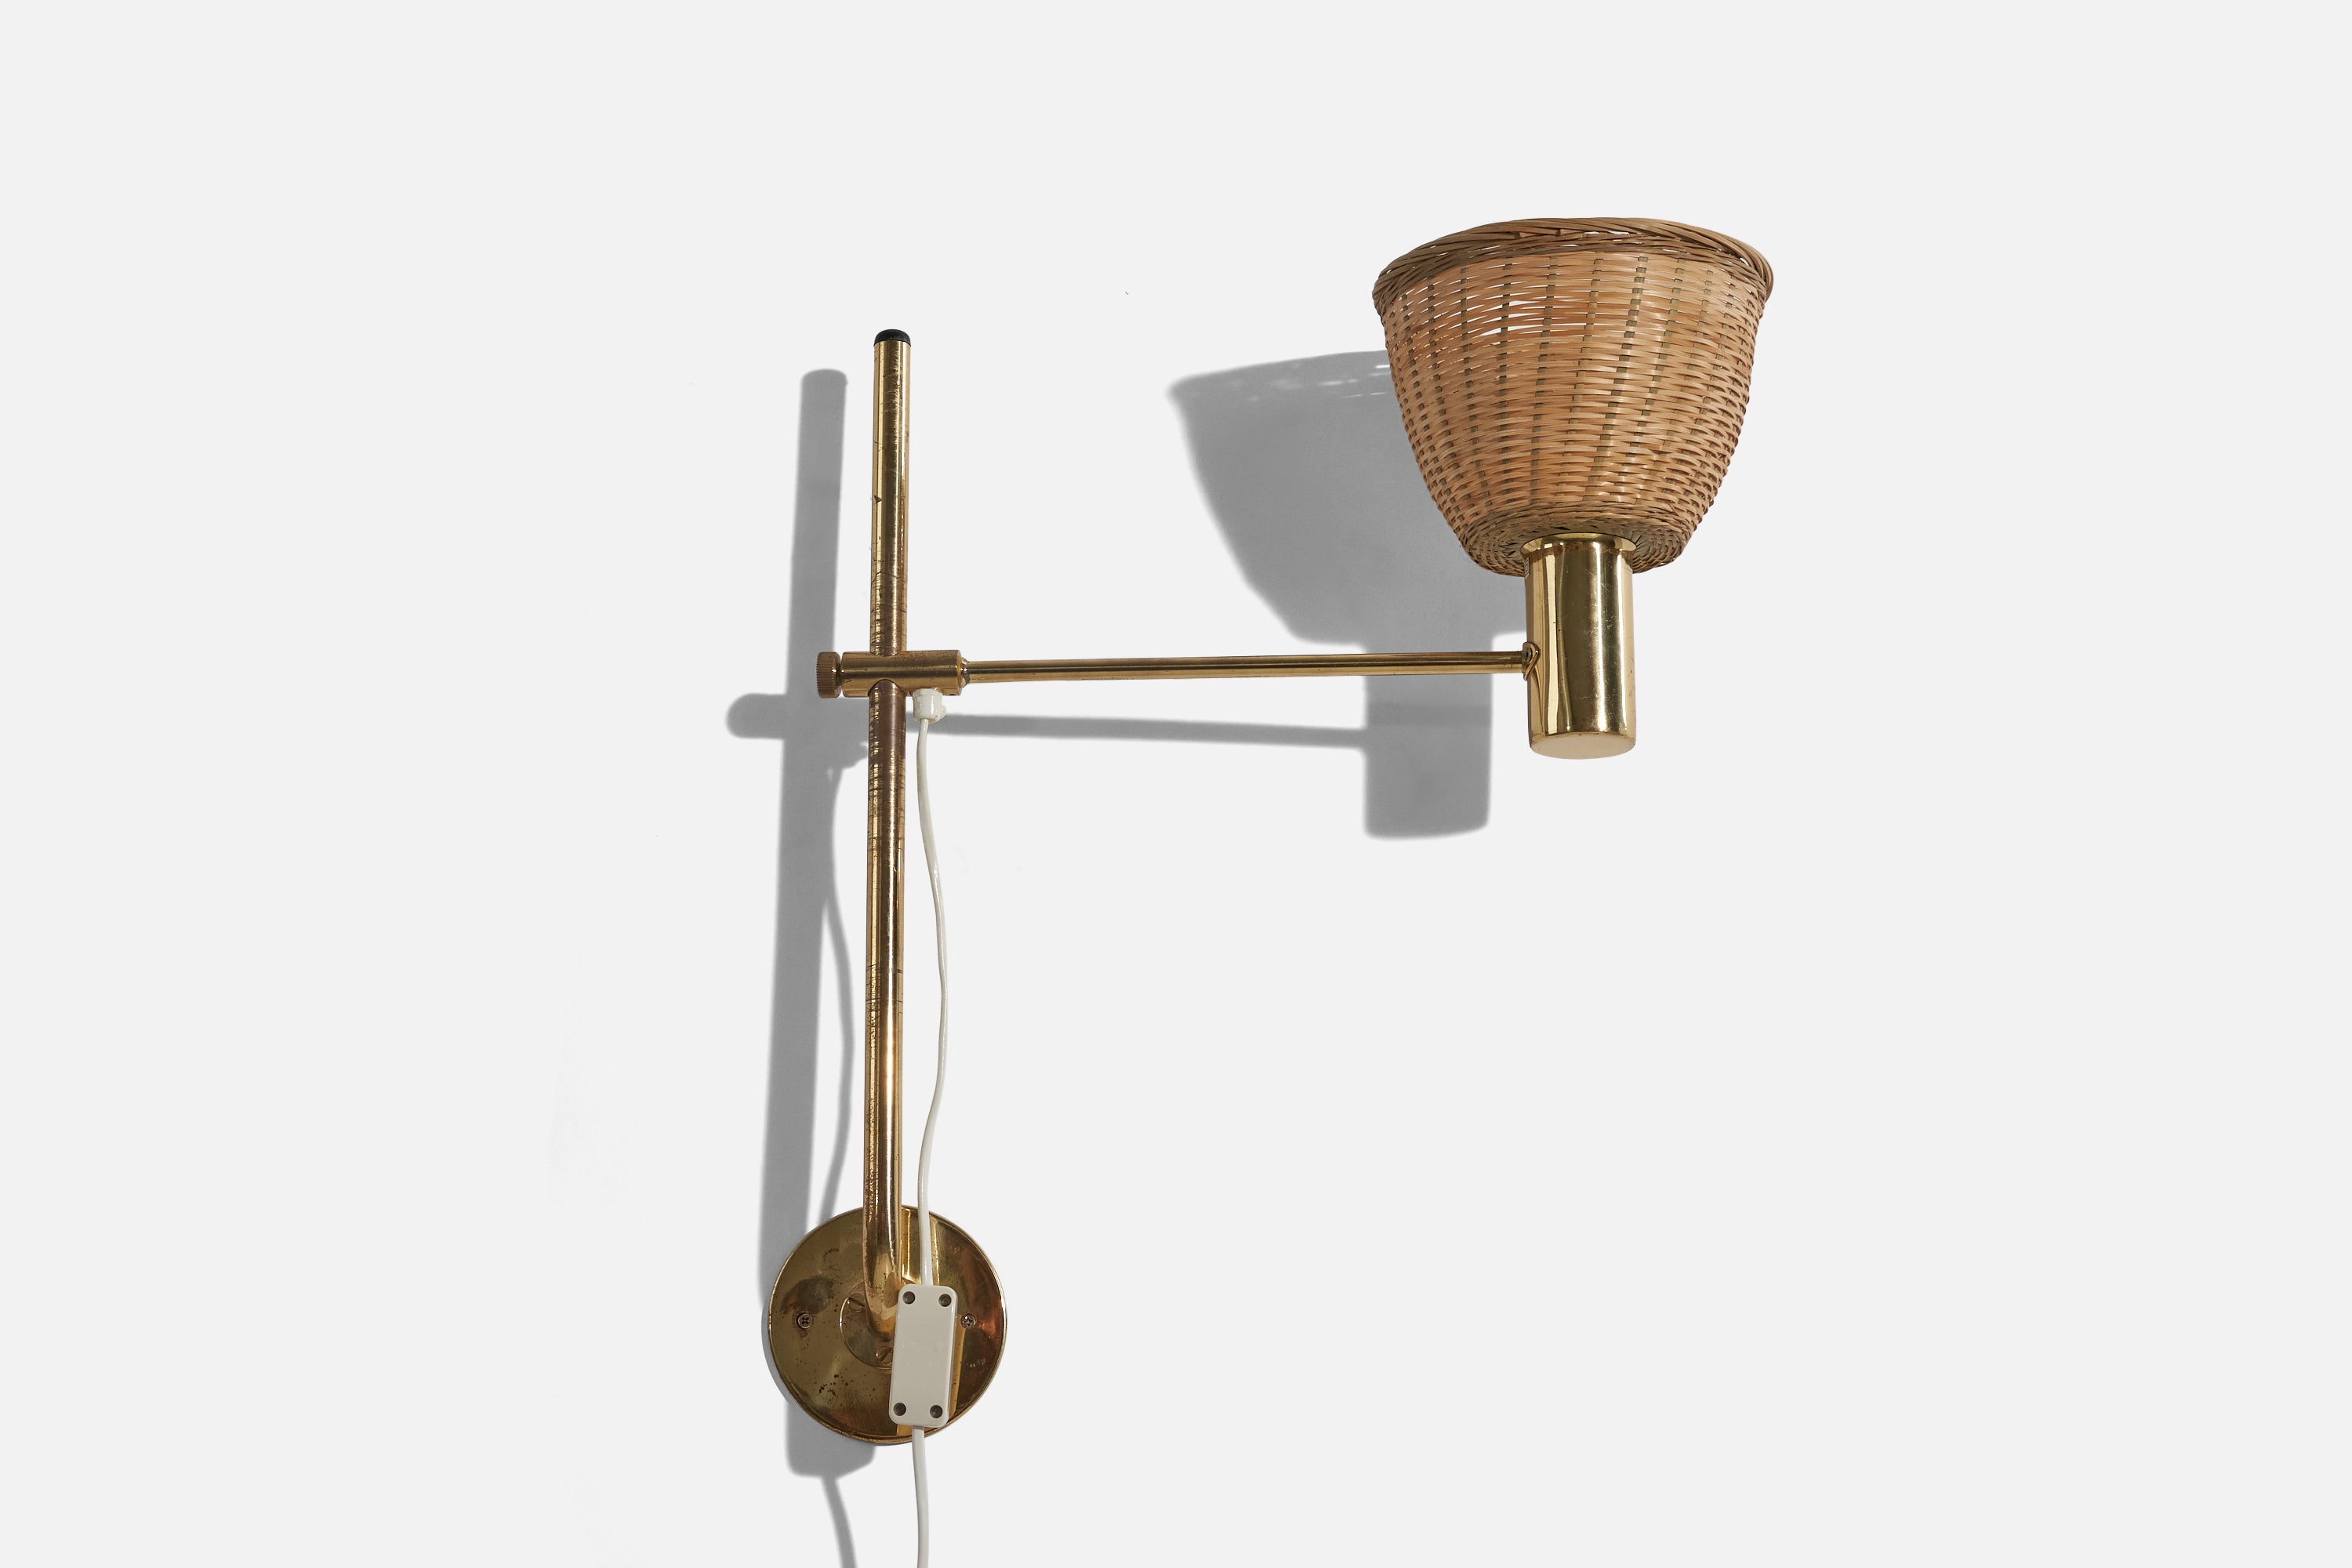 A pair of brass and rattan wall lights designed by Hans-Agne Jakobsson and produced by his own firm in Markaryd, Sweden. c. 1960s.

